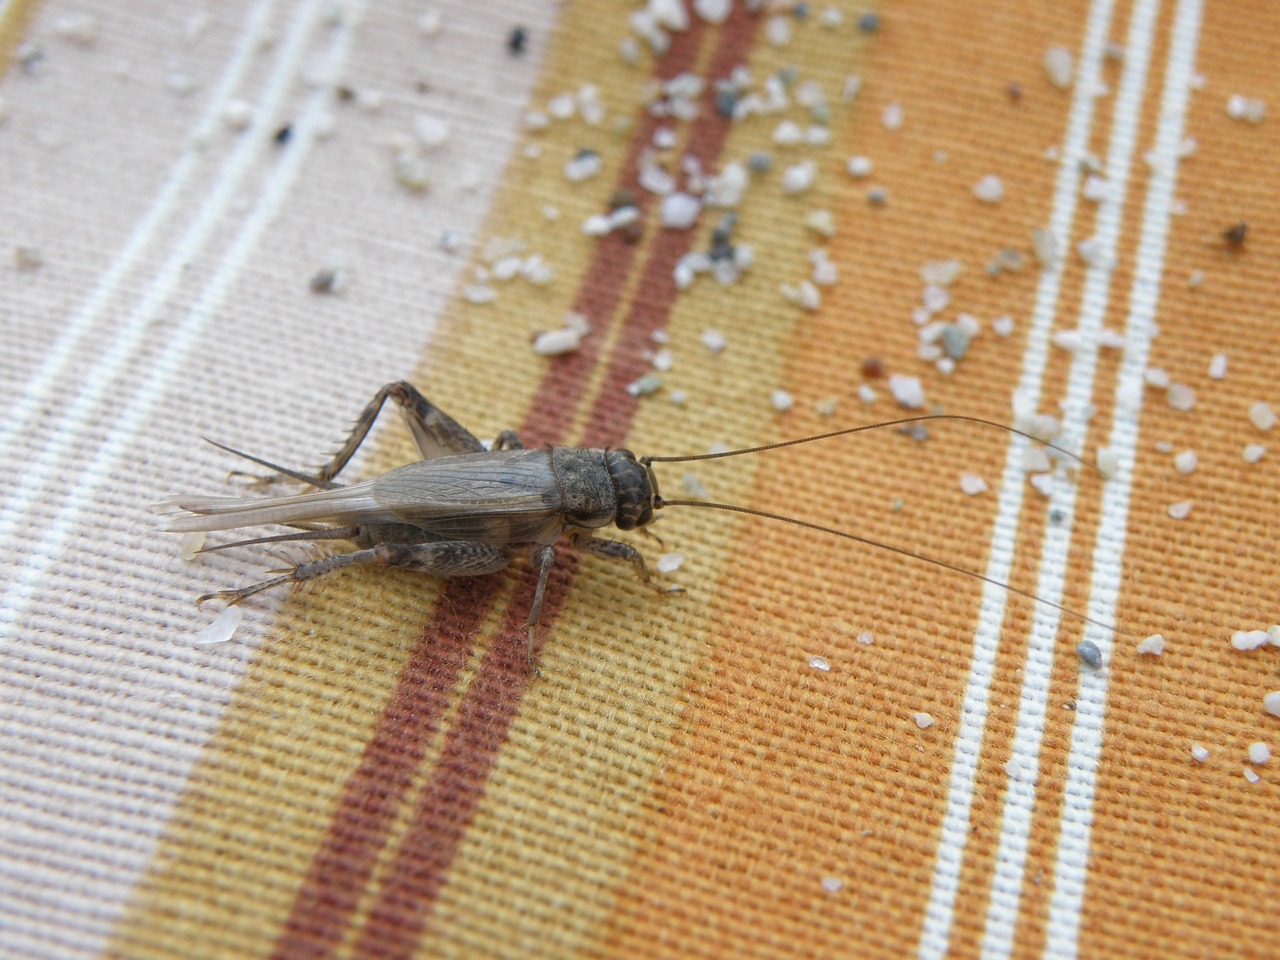  Picture of a cricket